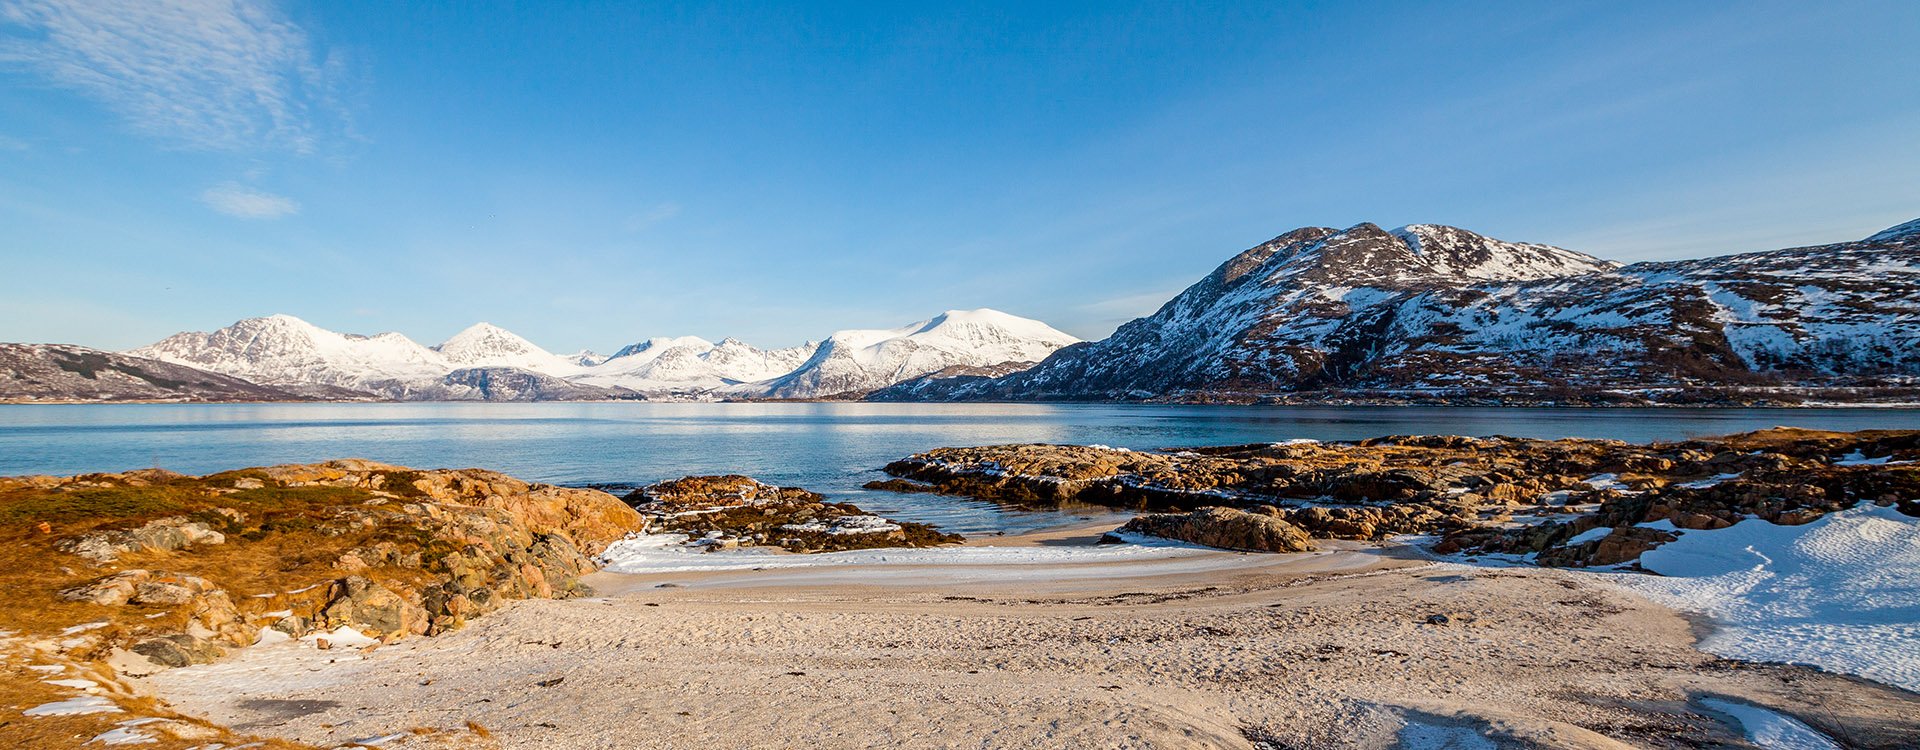 Snowy mountains and bright blue sky in the background. Spring landscape with melting snow and ice. Arctic Circle, Sommaroy, Norway